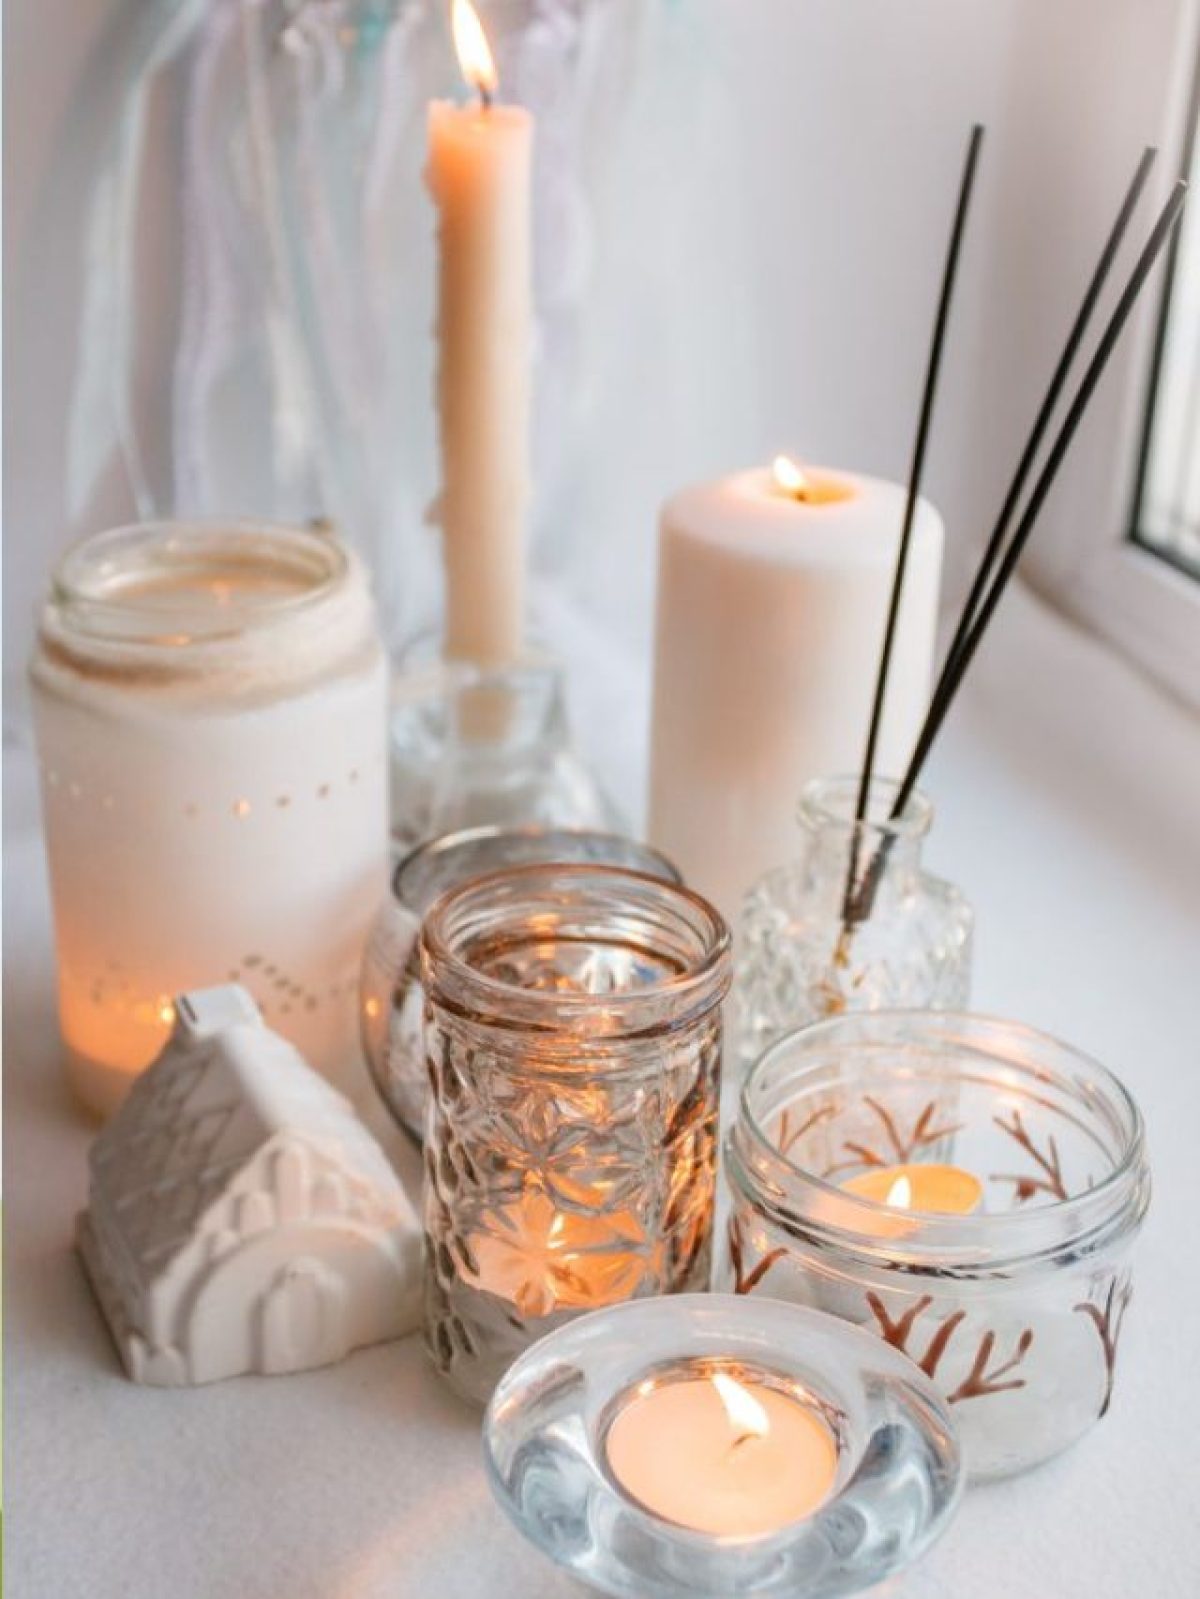 7 Beautiful Candle Designs For Home Decor - Tradeindia